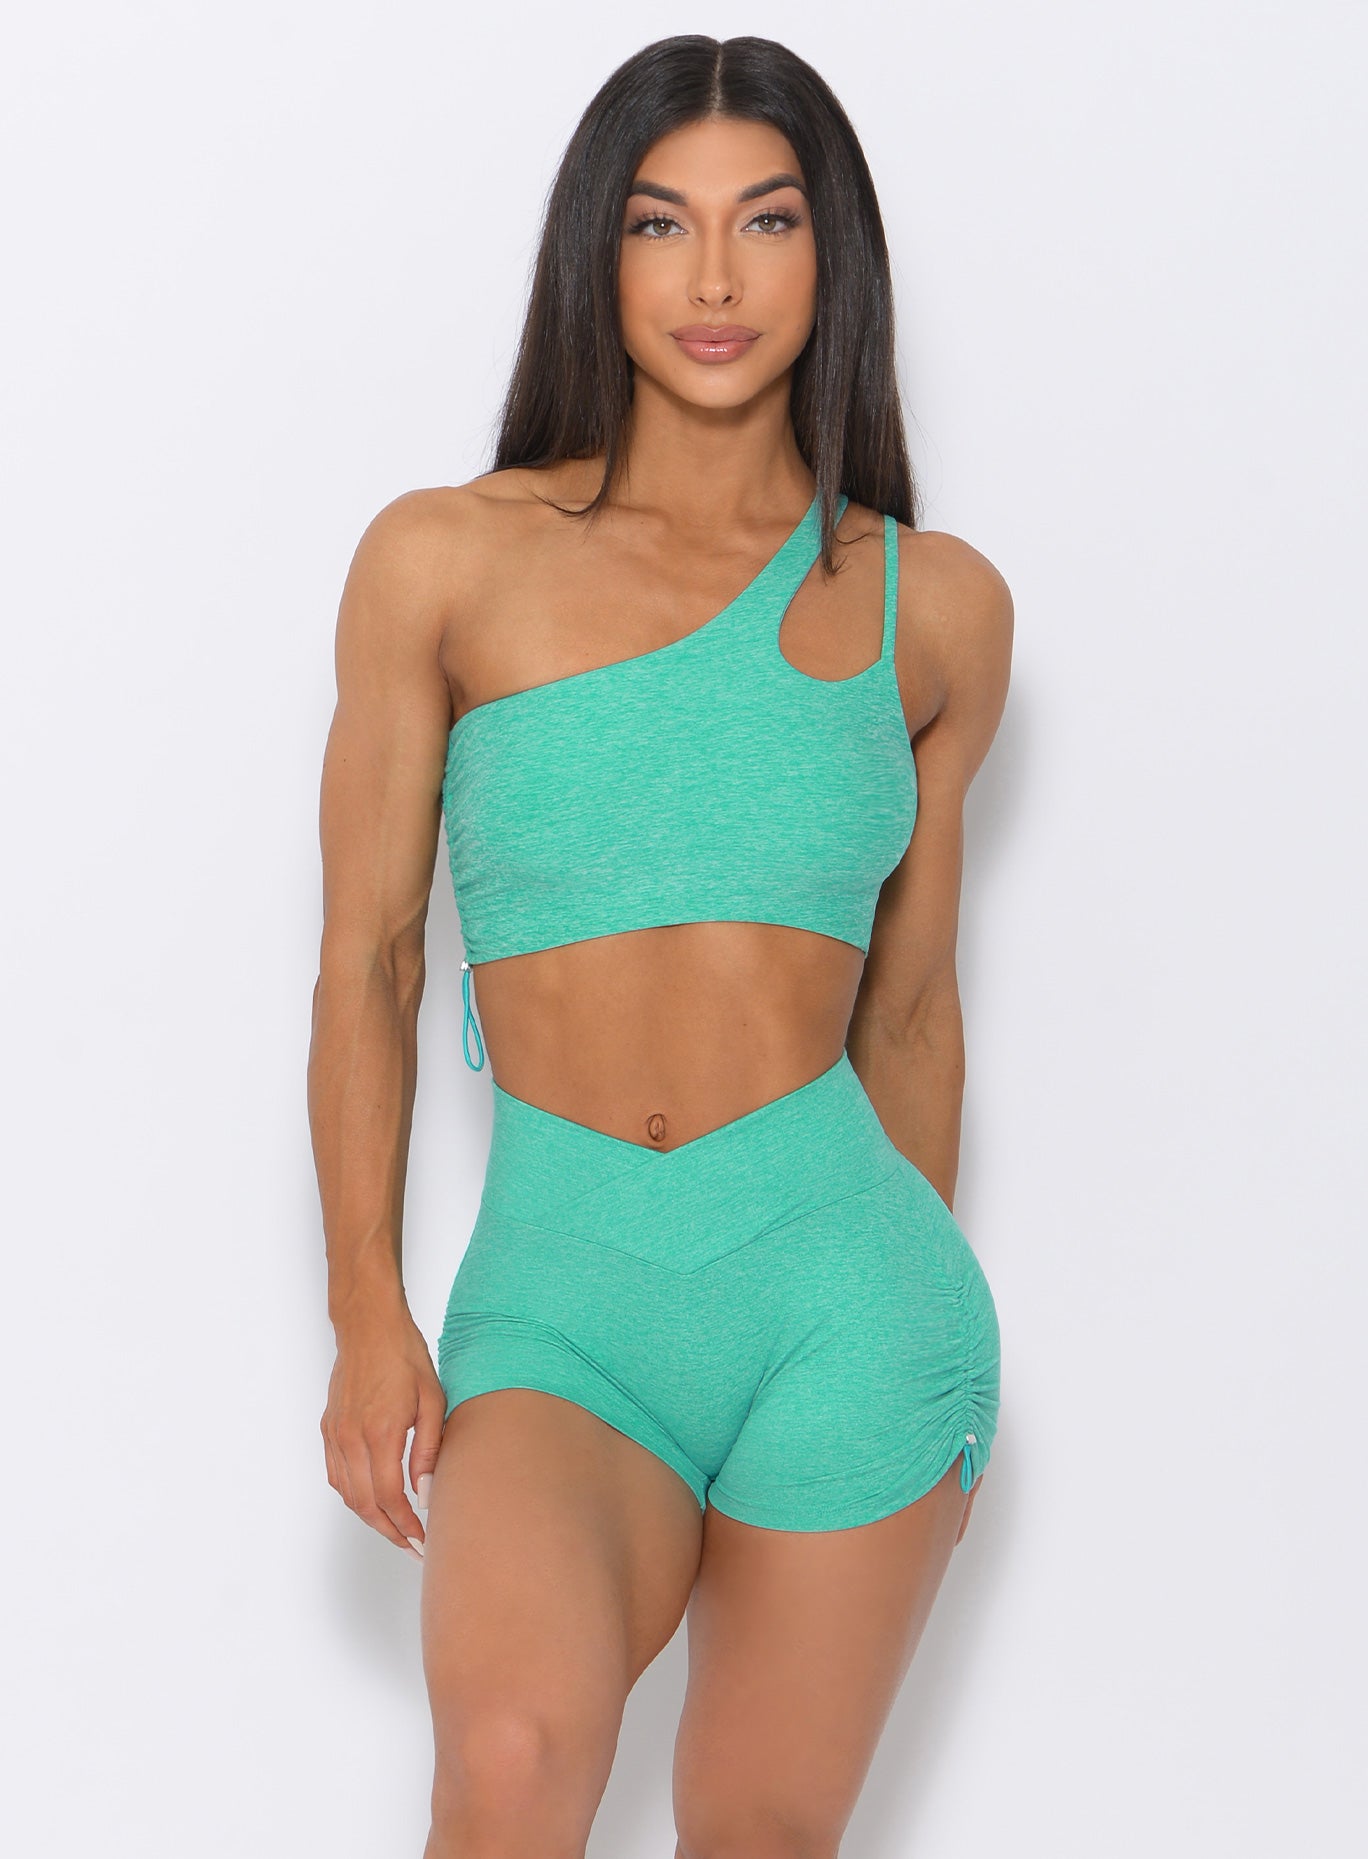 Front profile view of the model wearing our contour toggle shorts in mint color and a matching bra